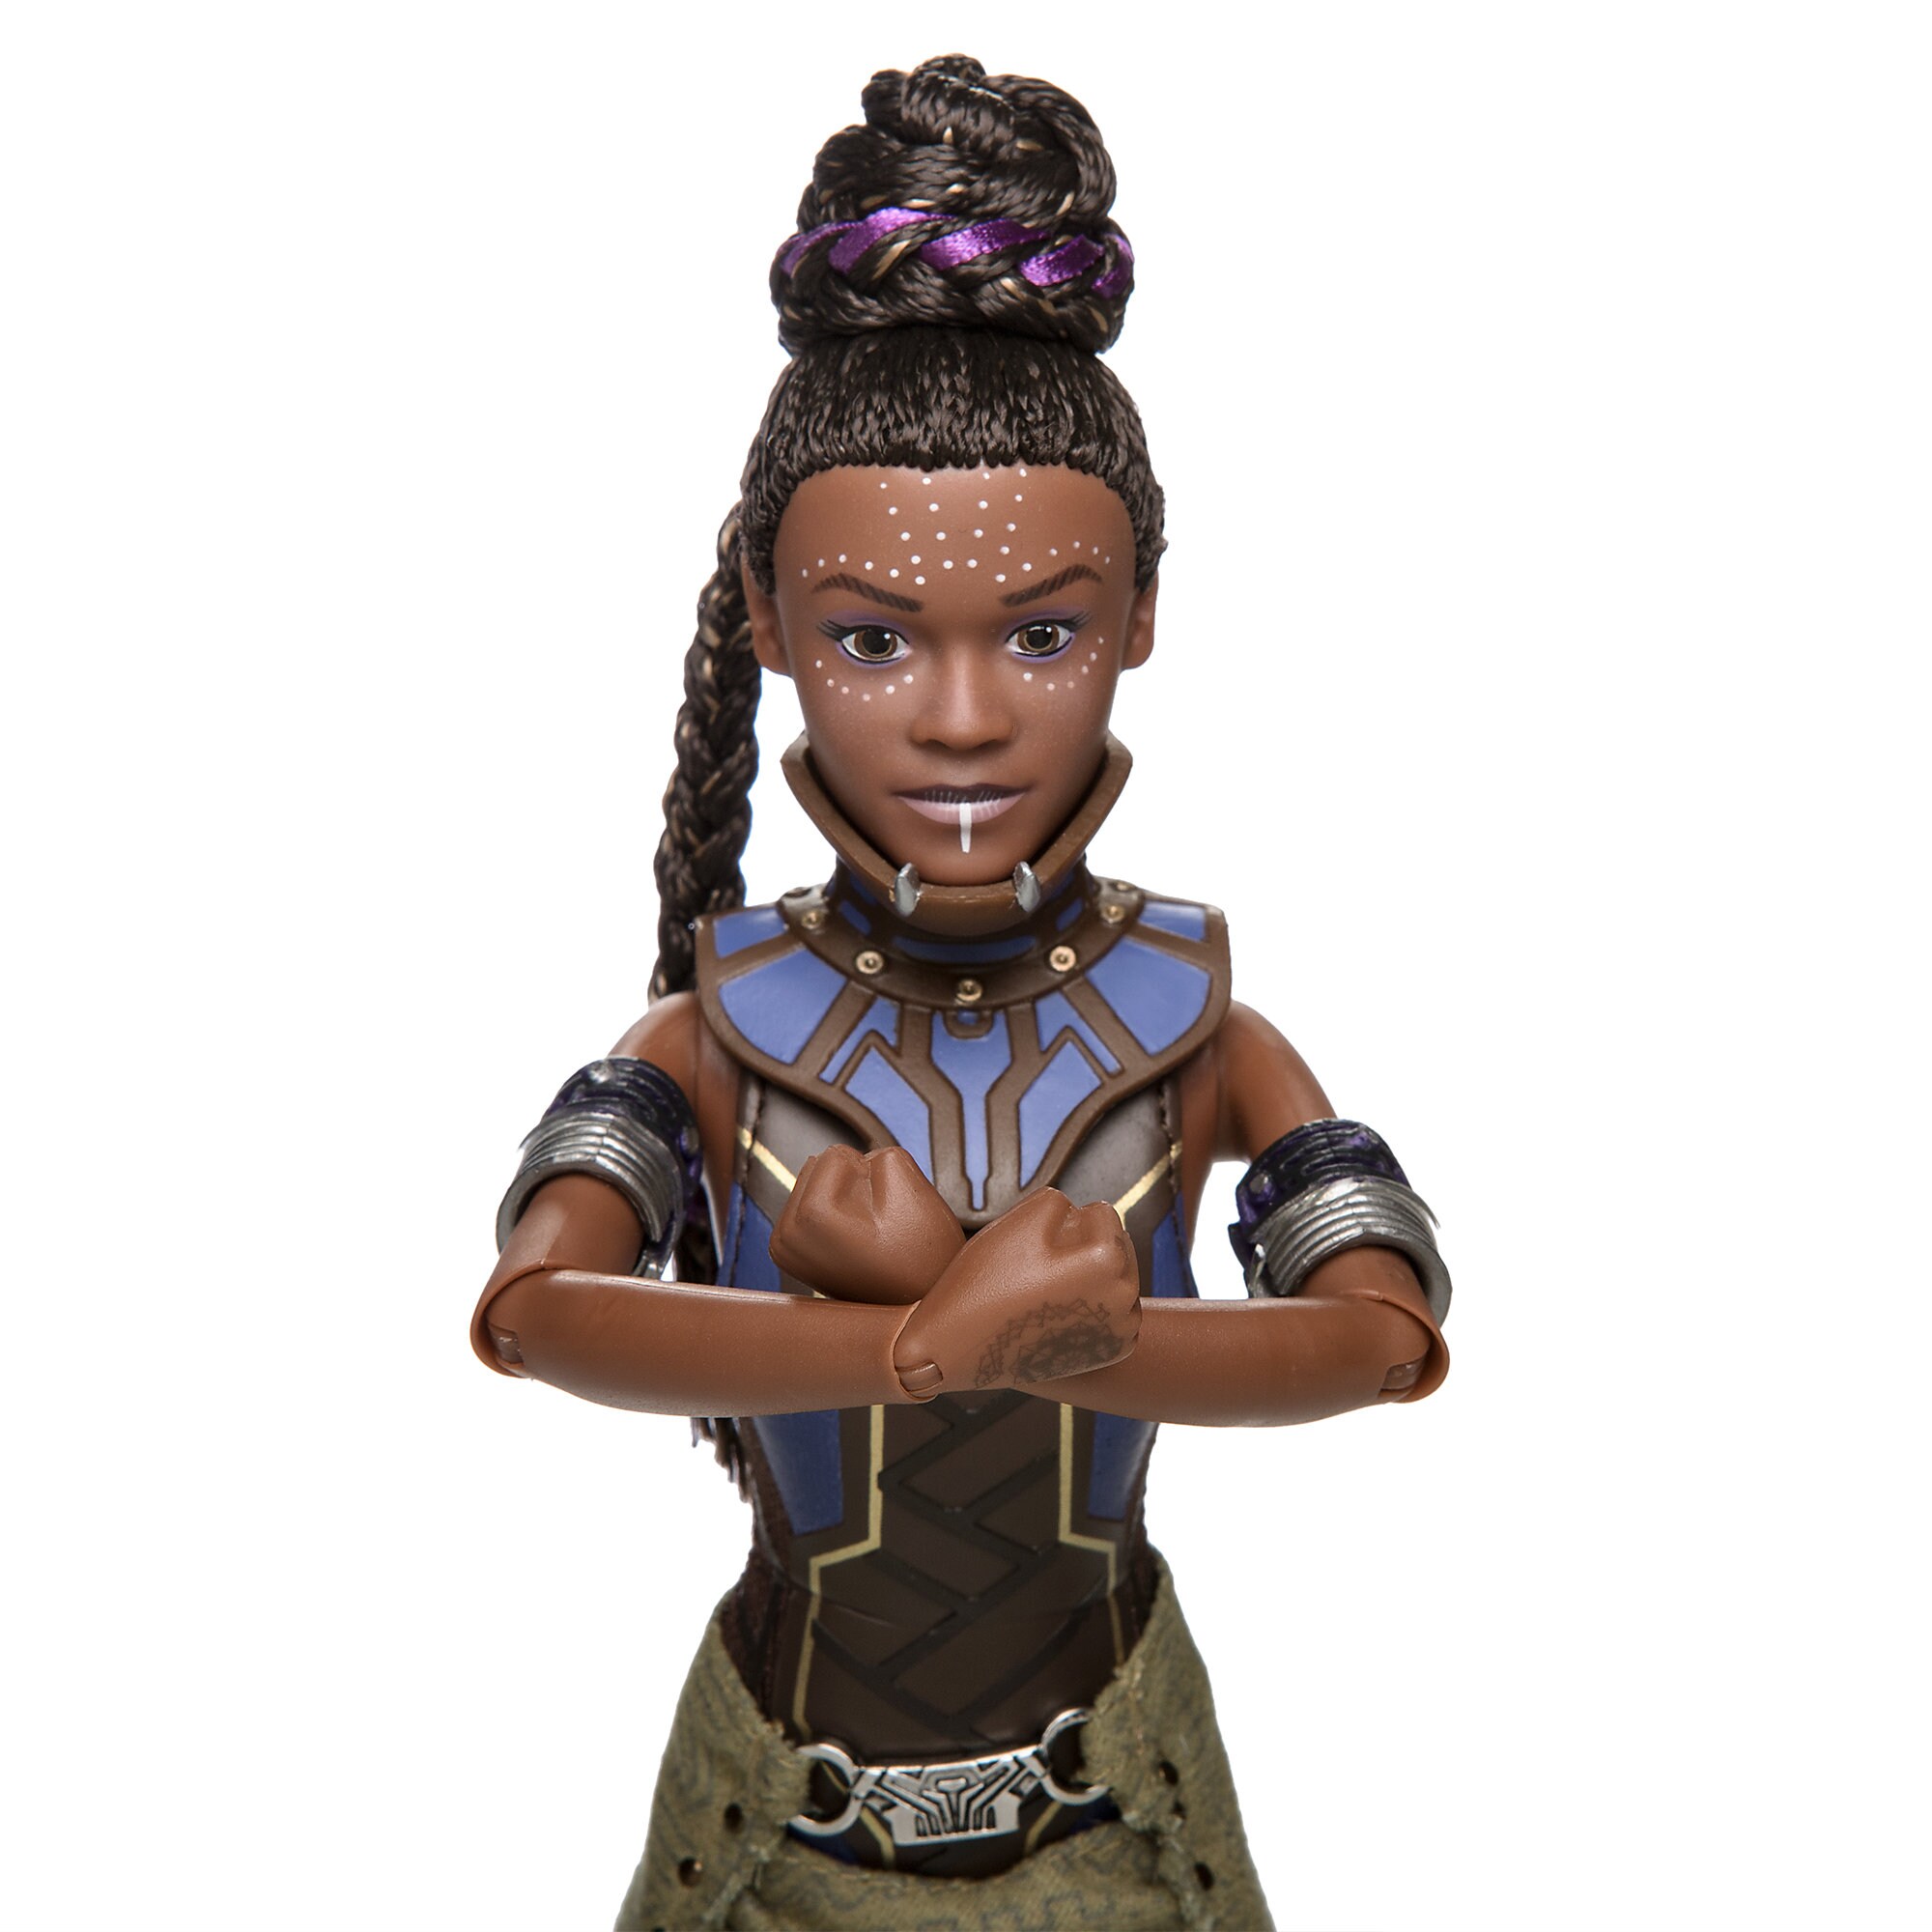 Shuri Special Edition Doll - Black Panther